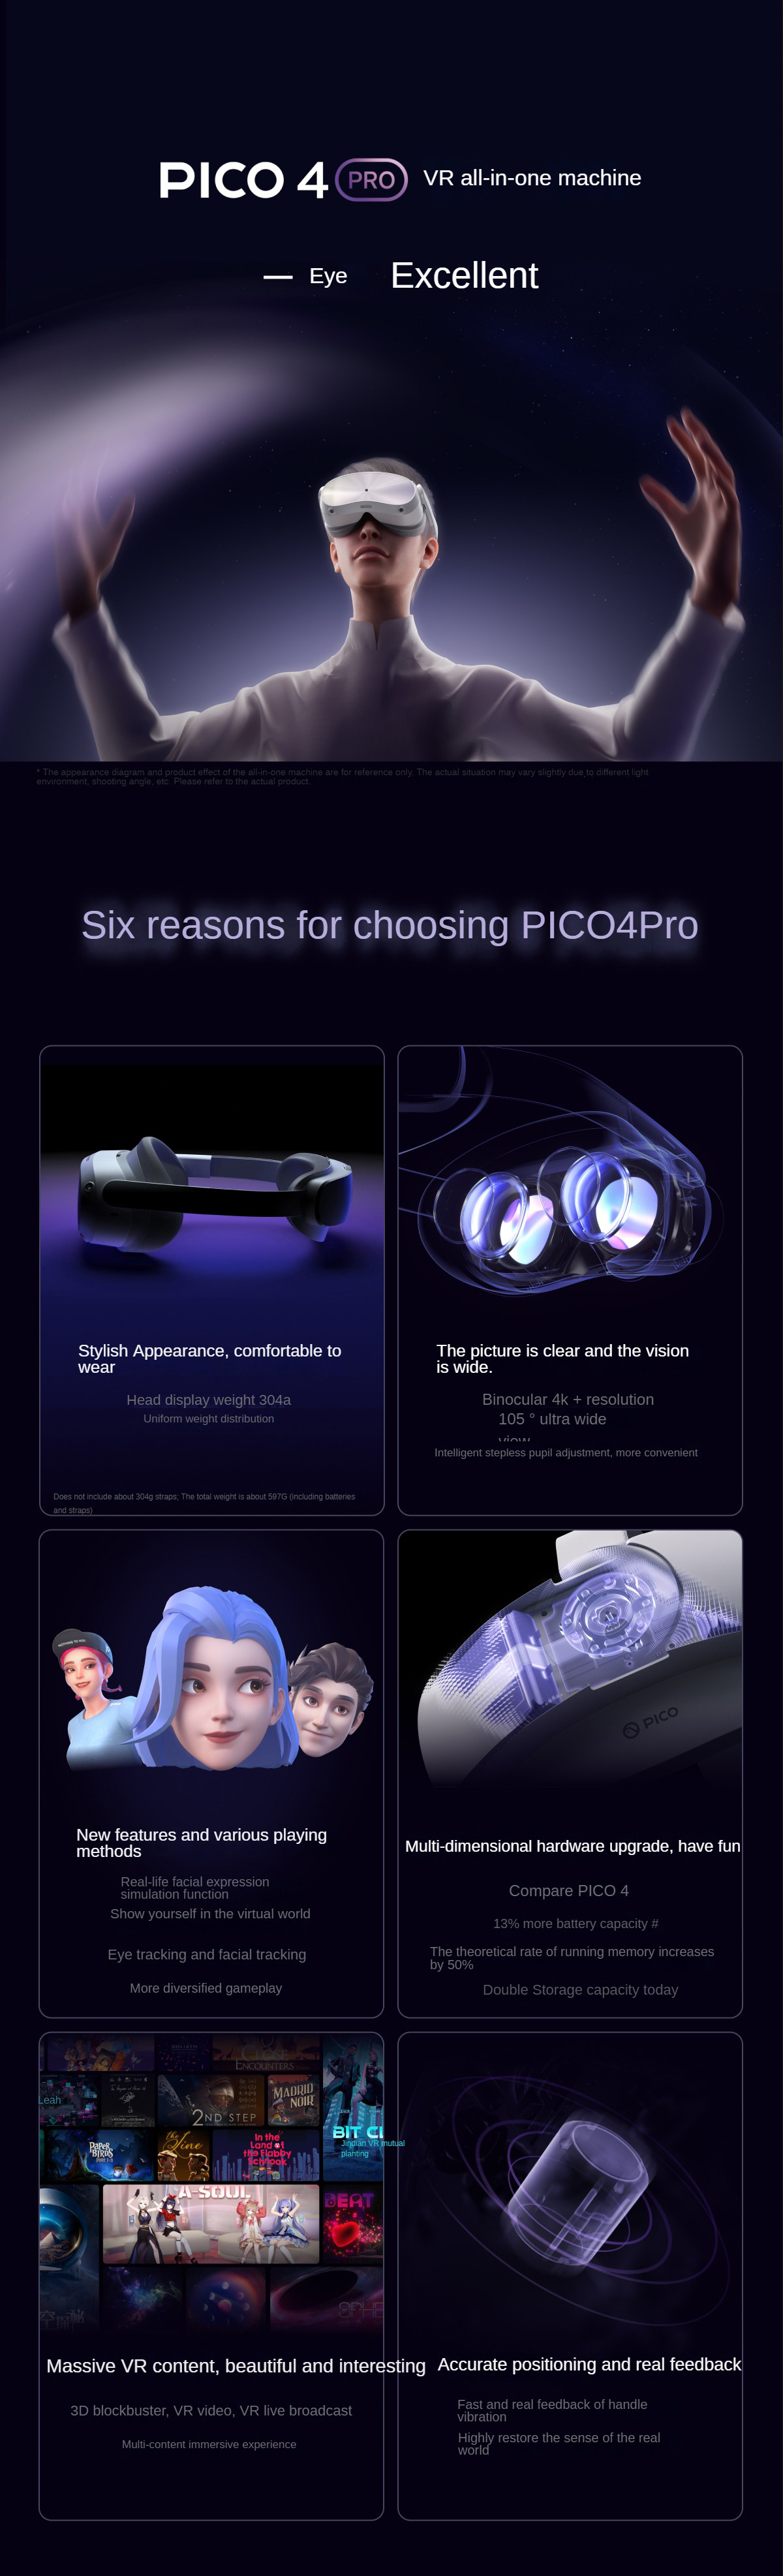 Pico 4 PRO VR Headset 512GB All-In-One Virtual Reality Headset - Brand New